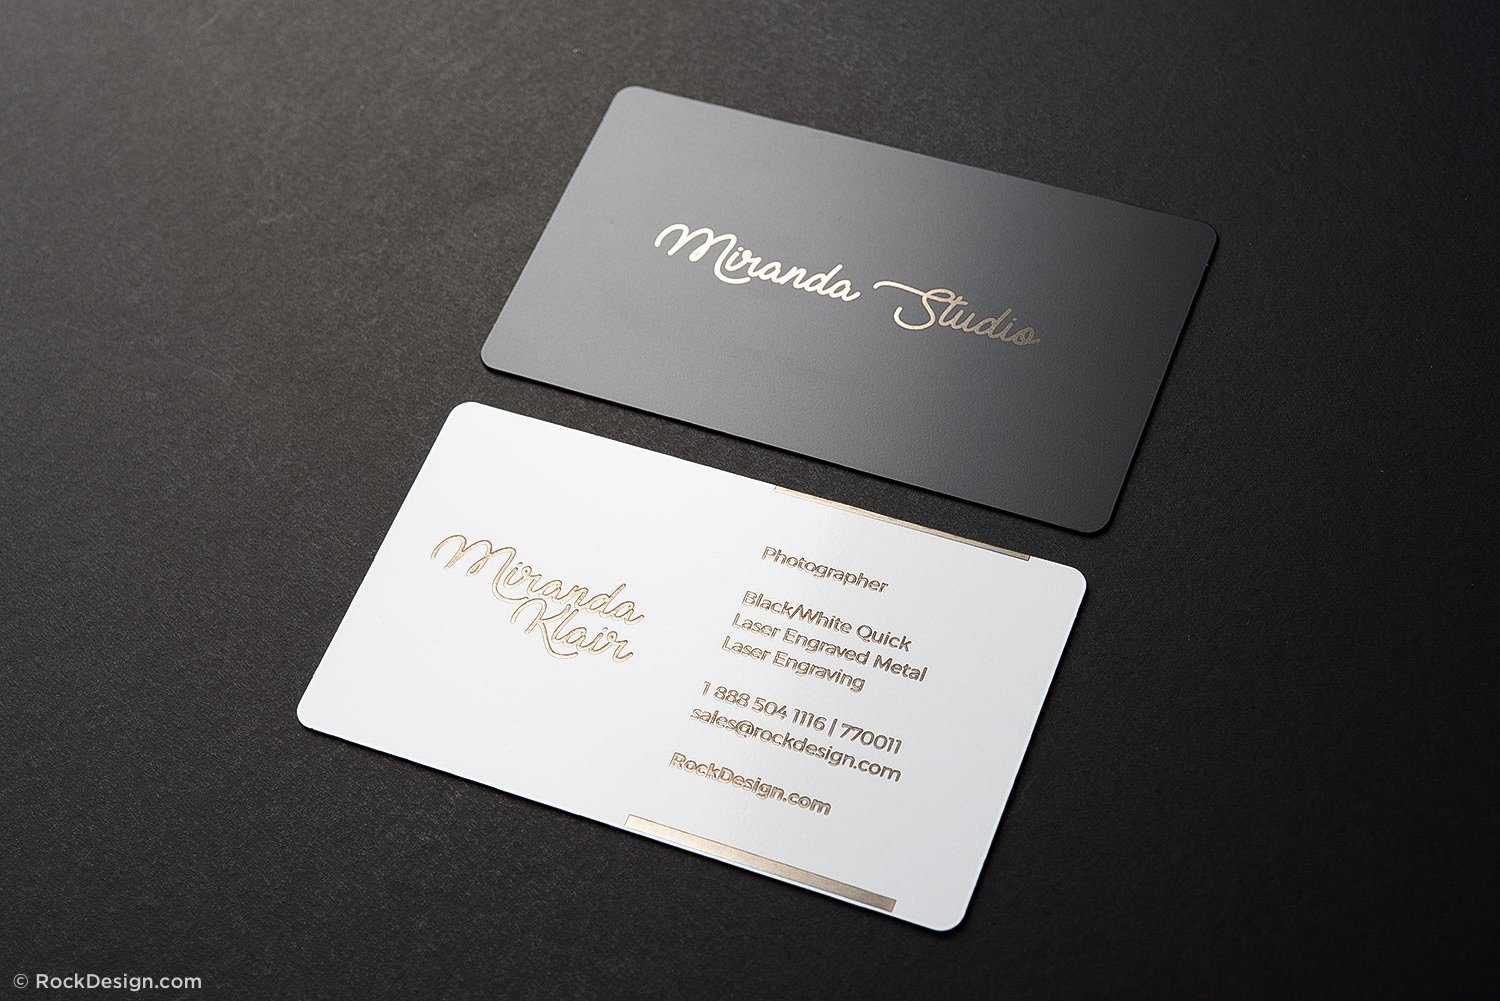 Fancy and creative photography quick metal business card template With Free Business Card Templates For Photographers